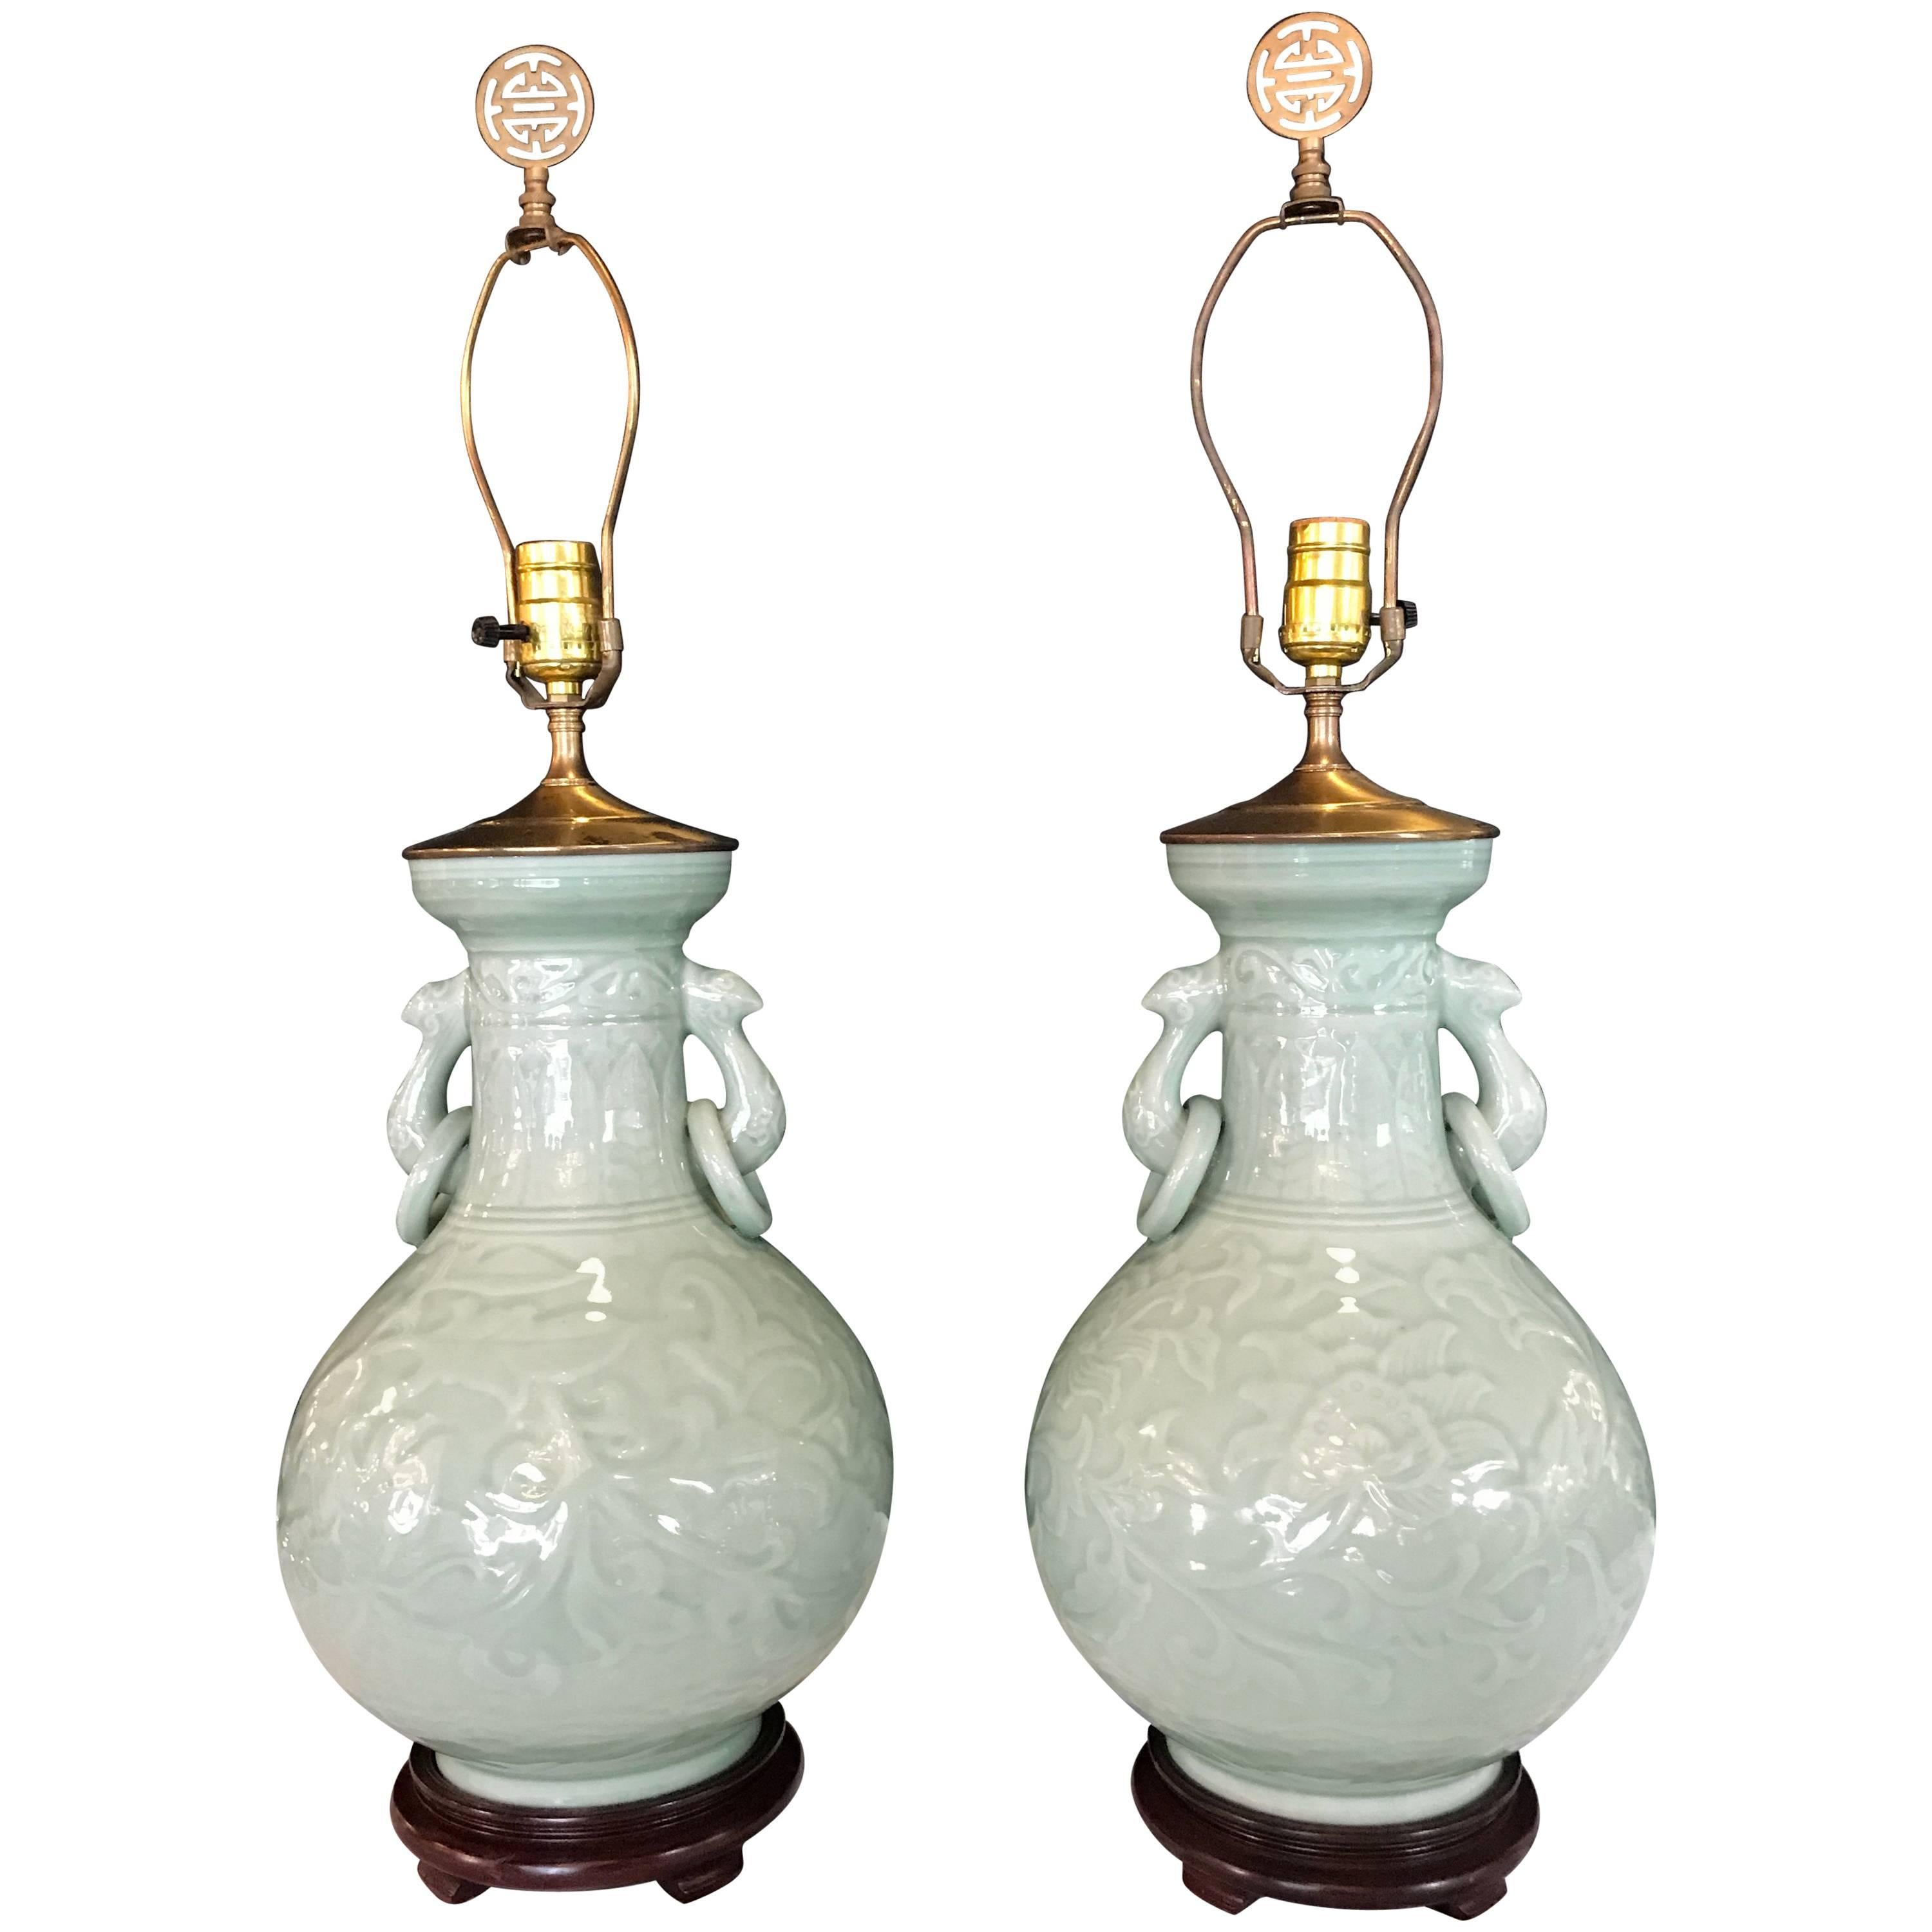 Pair of Chinese Celedon Antique Vases Mounted as Lamps